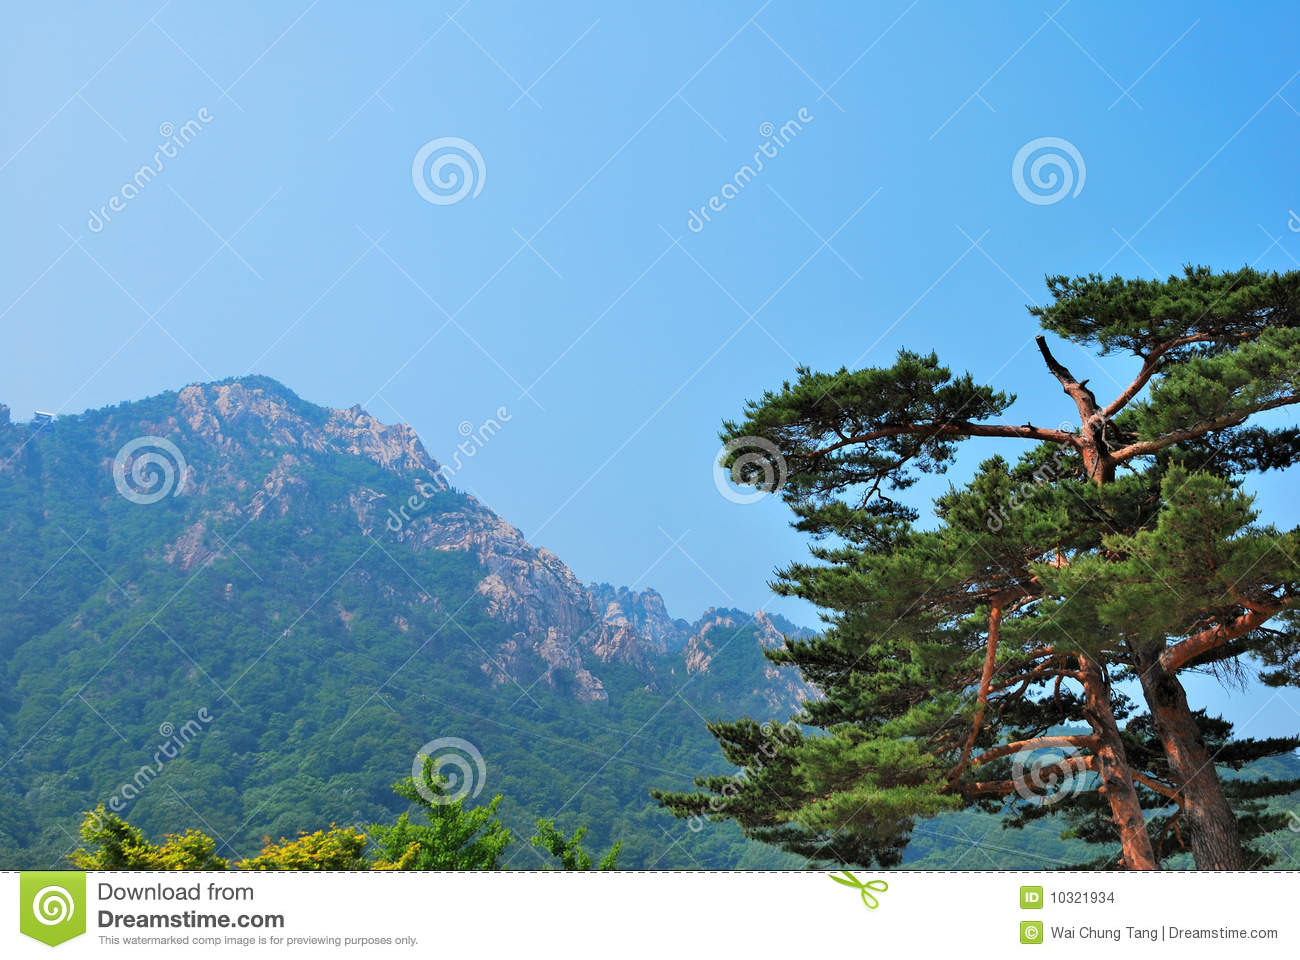 Treacherous Mountain Cliffs With Fig Tree In The Foreground